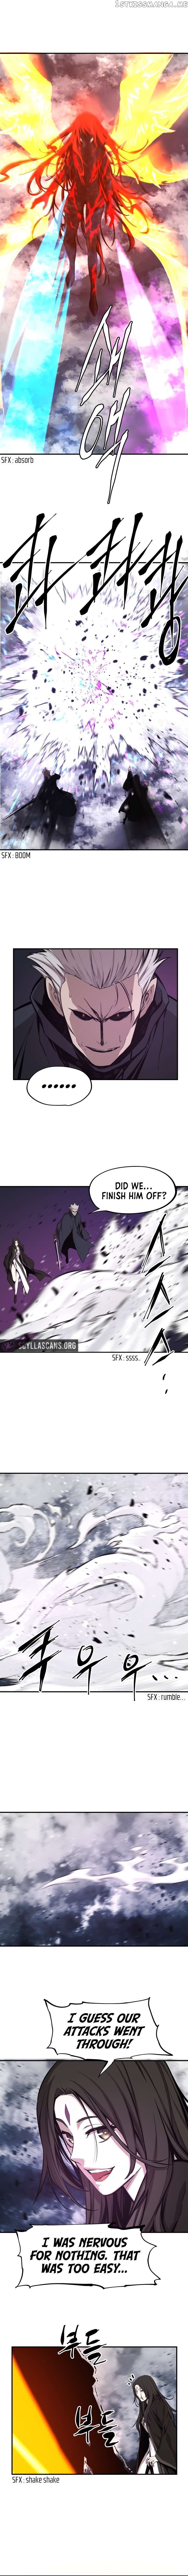 Legend of Mir: Gold Armored Sword Dragon Chapter 45 page 6